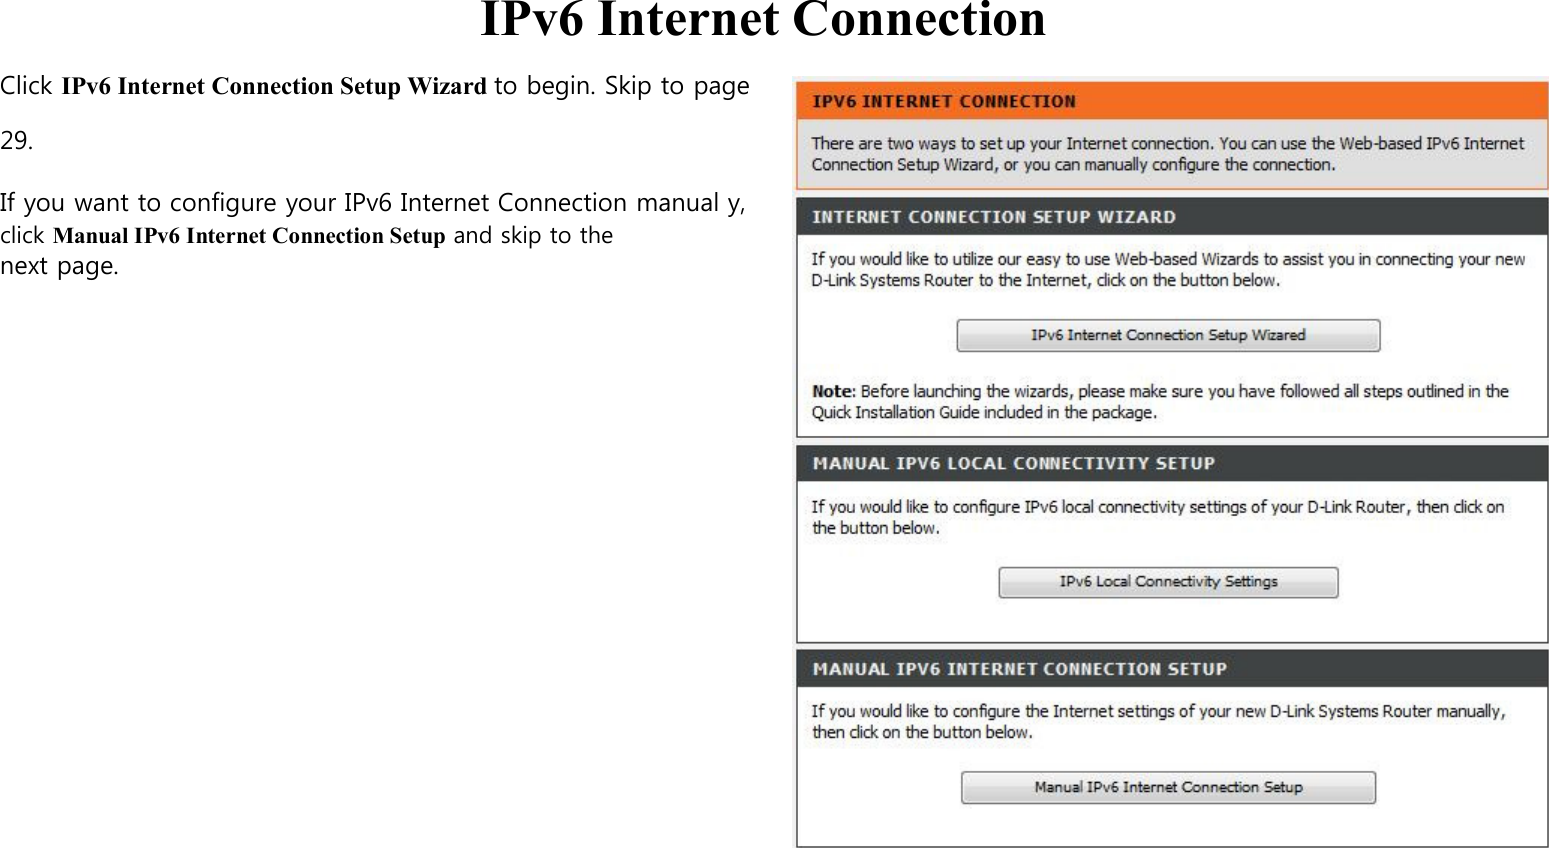   IPv6 Internet Connection Click IPv6 Internet Connection Setup Wizard to begin. Skip to page 29.  If you want to configure your IPv6 Internet Connection manual y, click Manual IPv6 Internet Connection Setup and skip to the next page.                                         